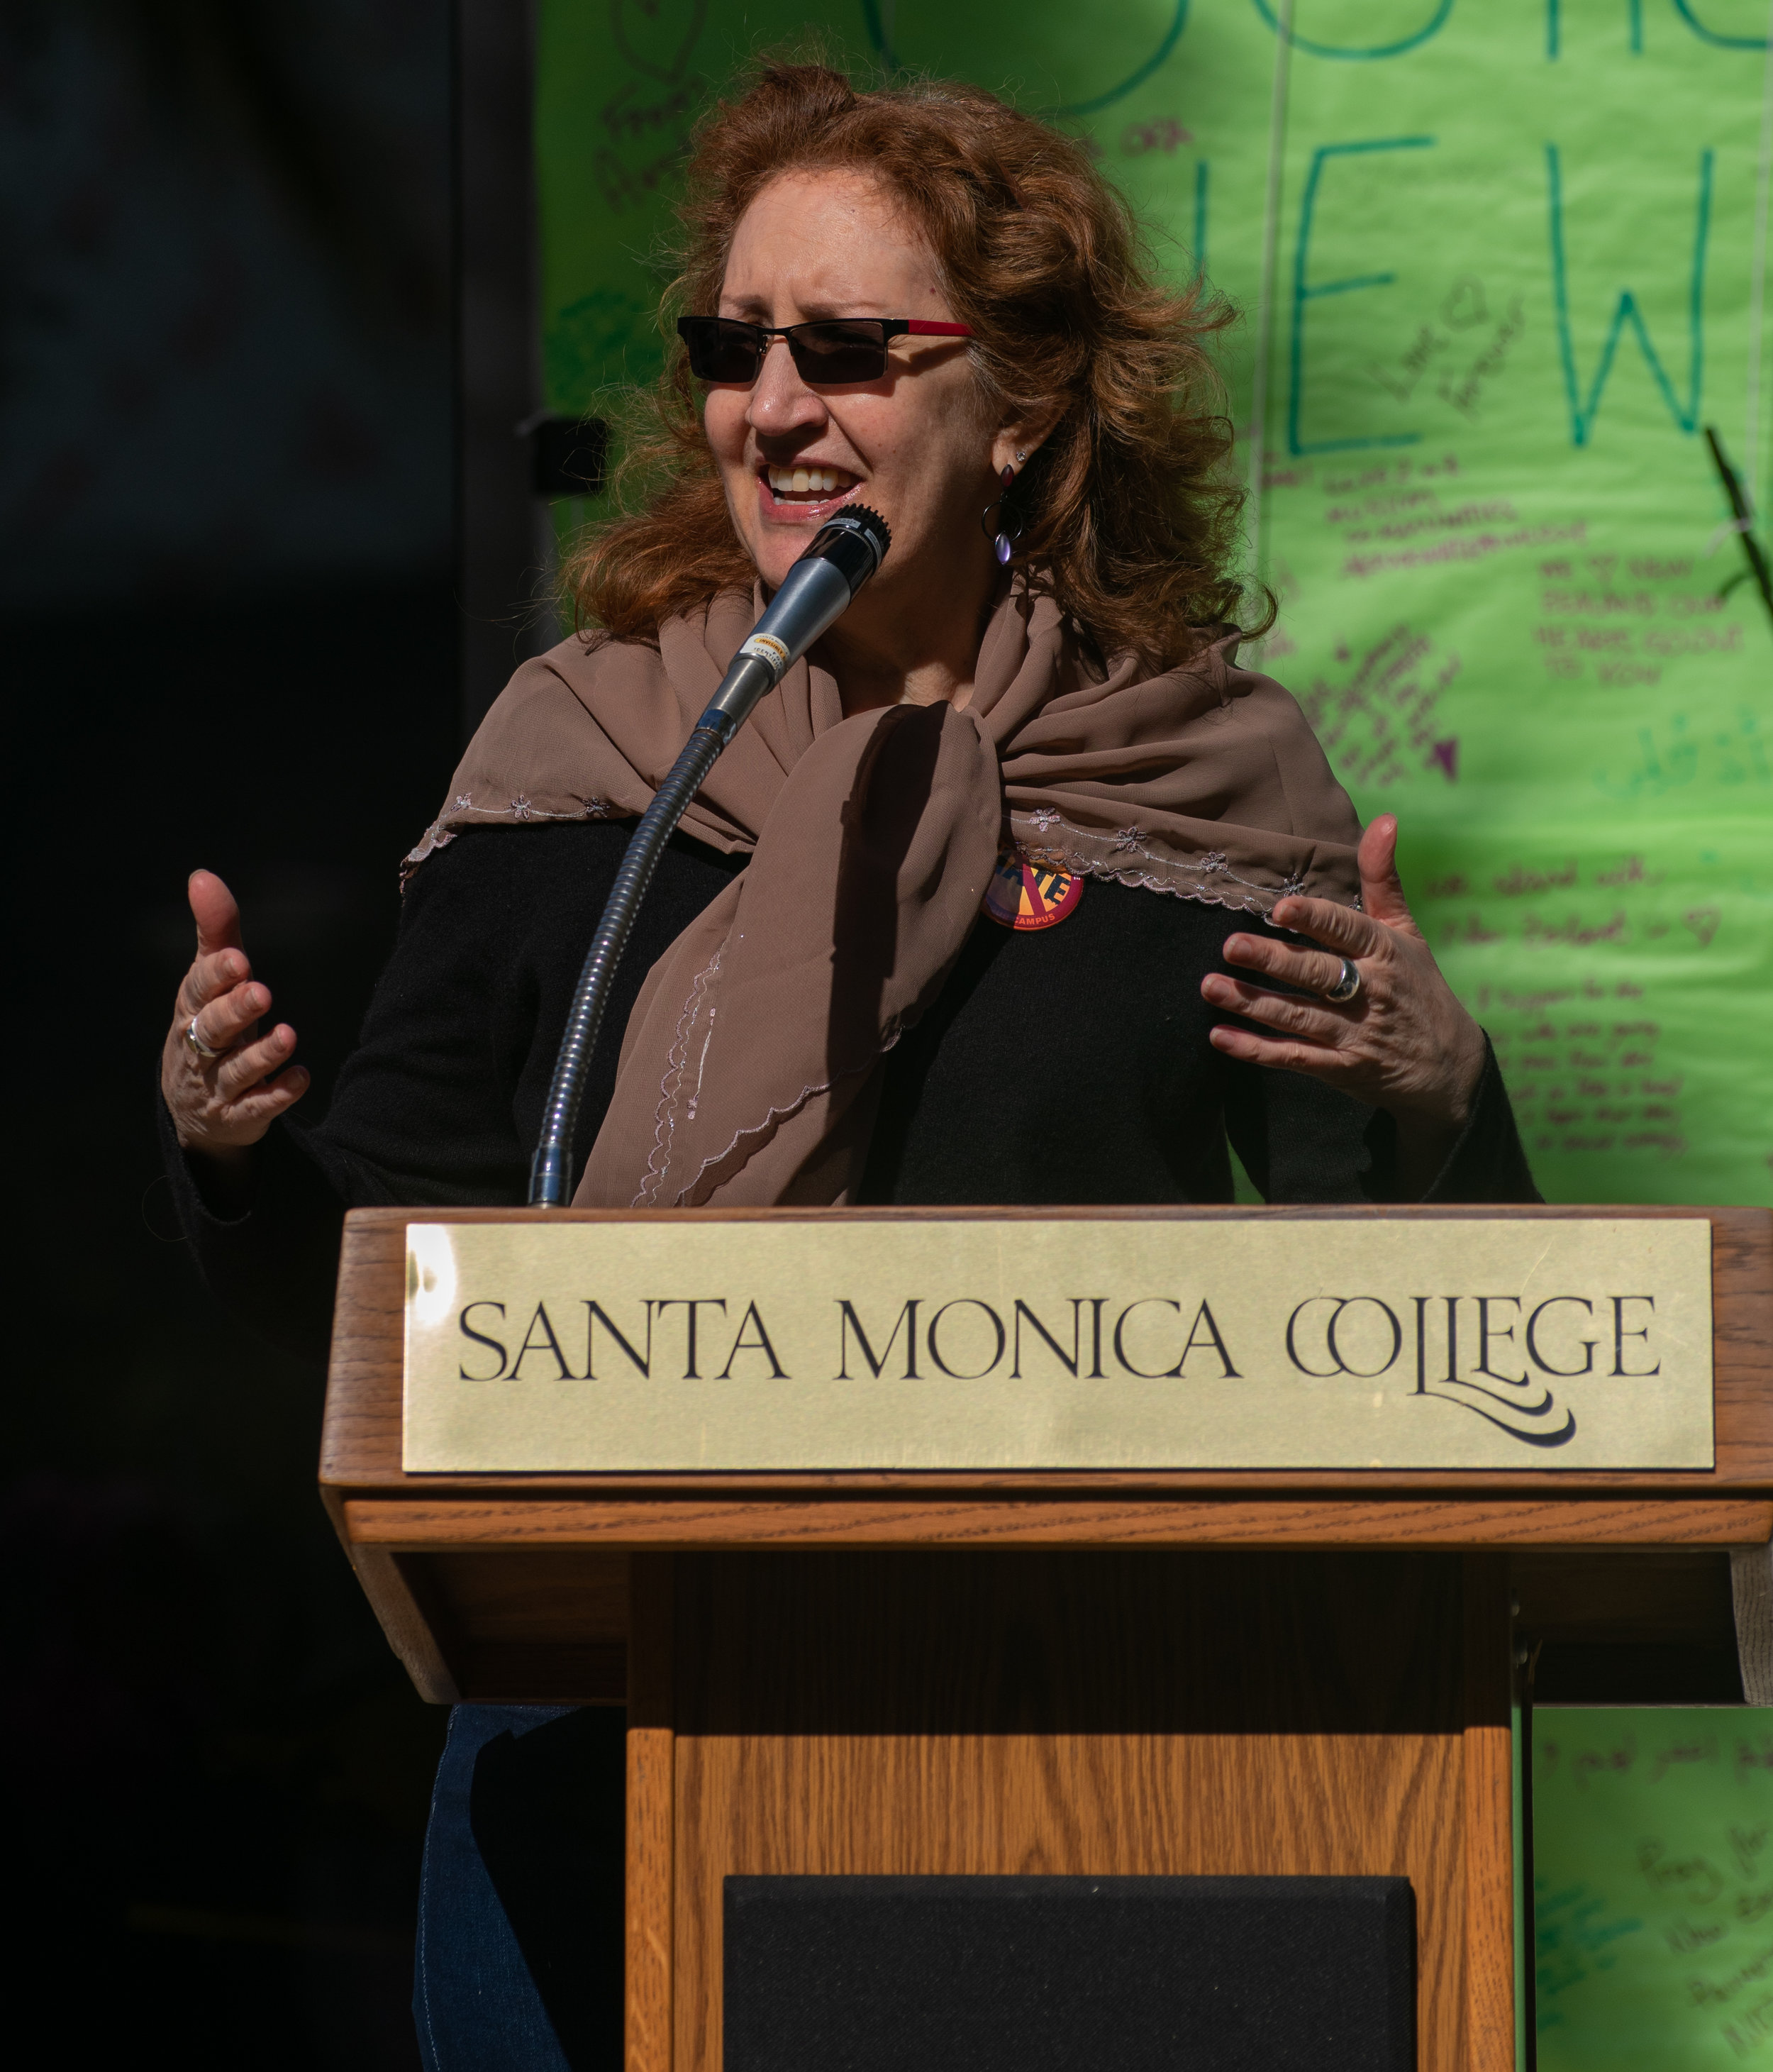  Lisa Patriquin from the Guidbord Center for Interfaith Dialogue explaining the benefits of attending service of another religion at  vigil for the victims of the Christchurch shootings on Wednesday March 20th 2019 at Santa Monica College (SMC), Sant